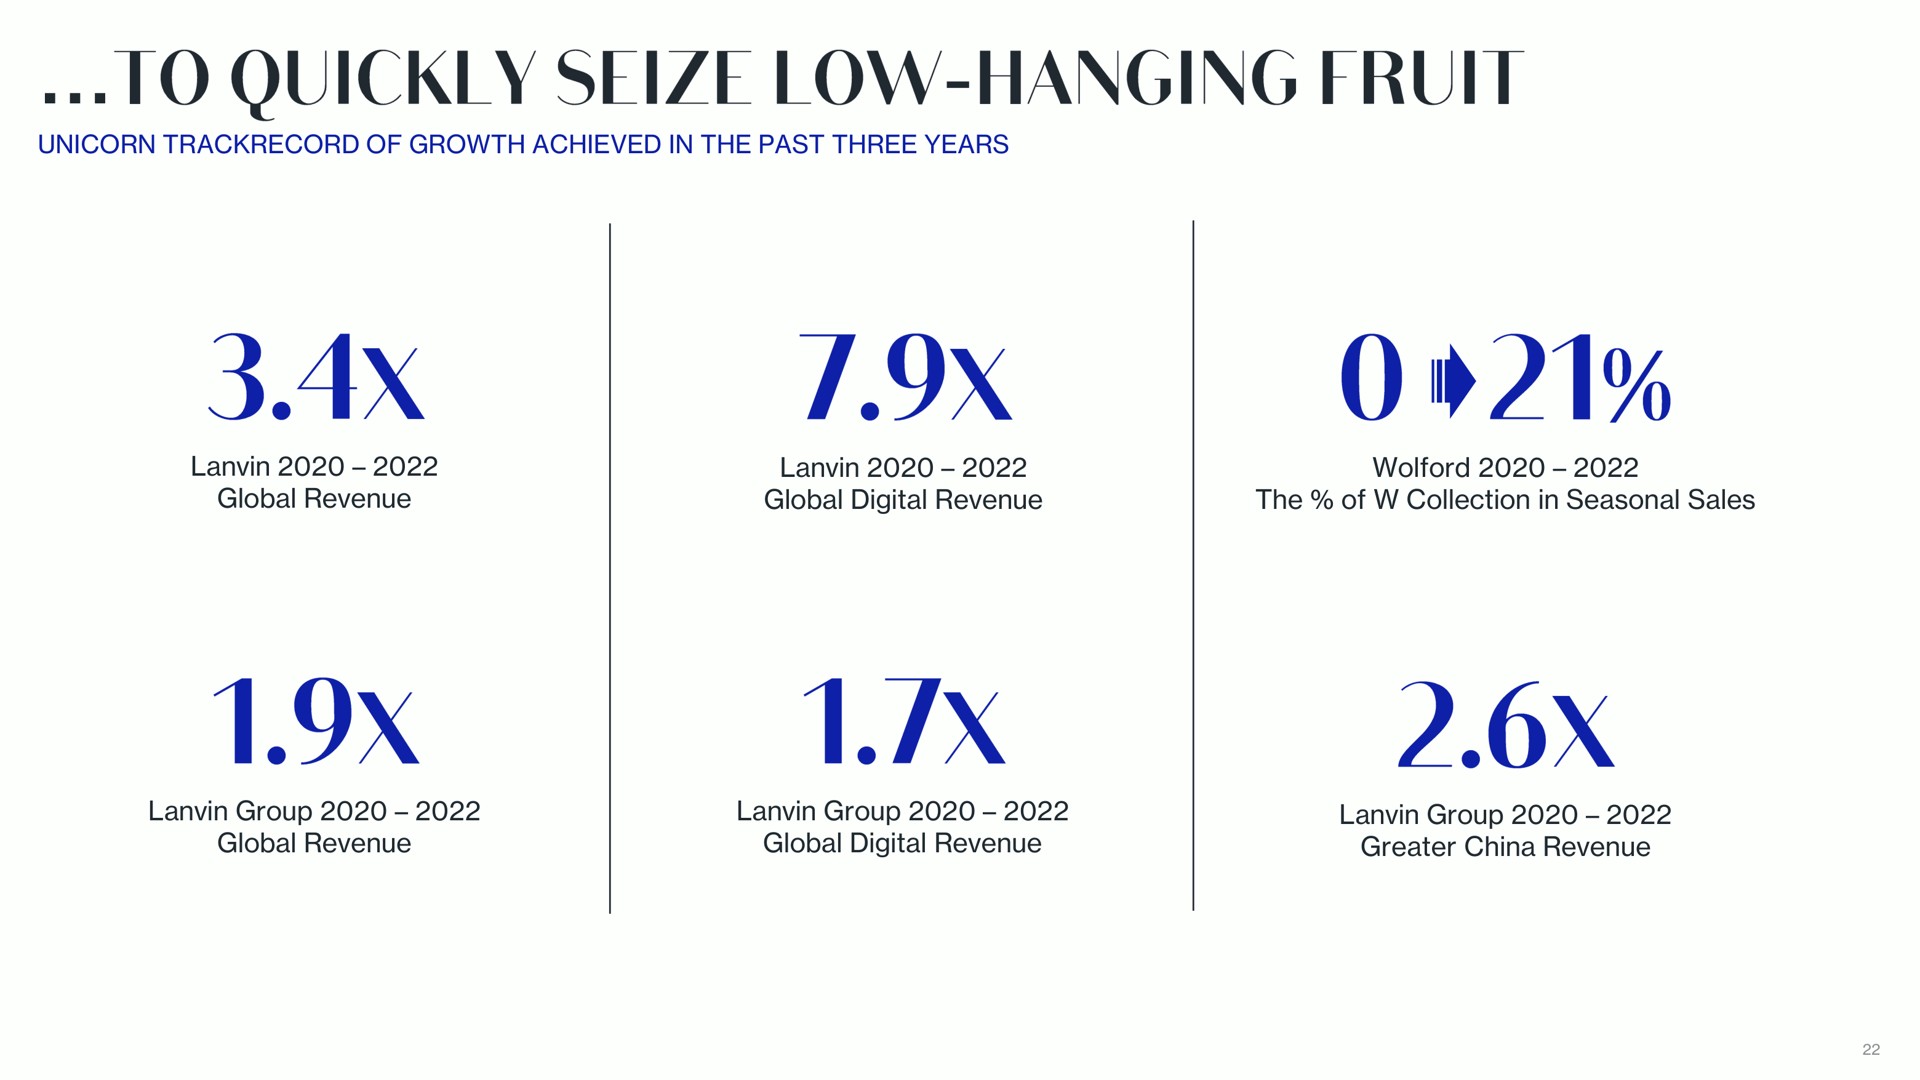 unicorn of growth achieved in the past three years global revenue global digital revenue the of collection in seasonal sales group global revenue group global digital revenue group greater china revenue quickly seize low hanging fruit | Lanvin